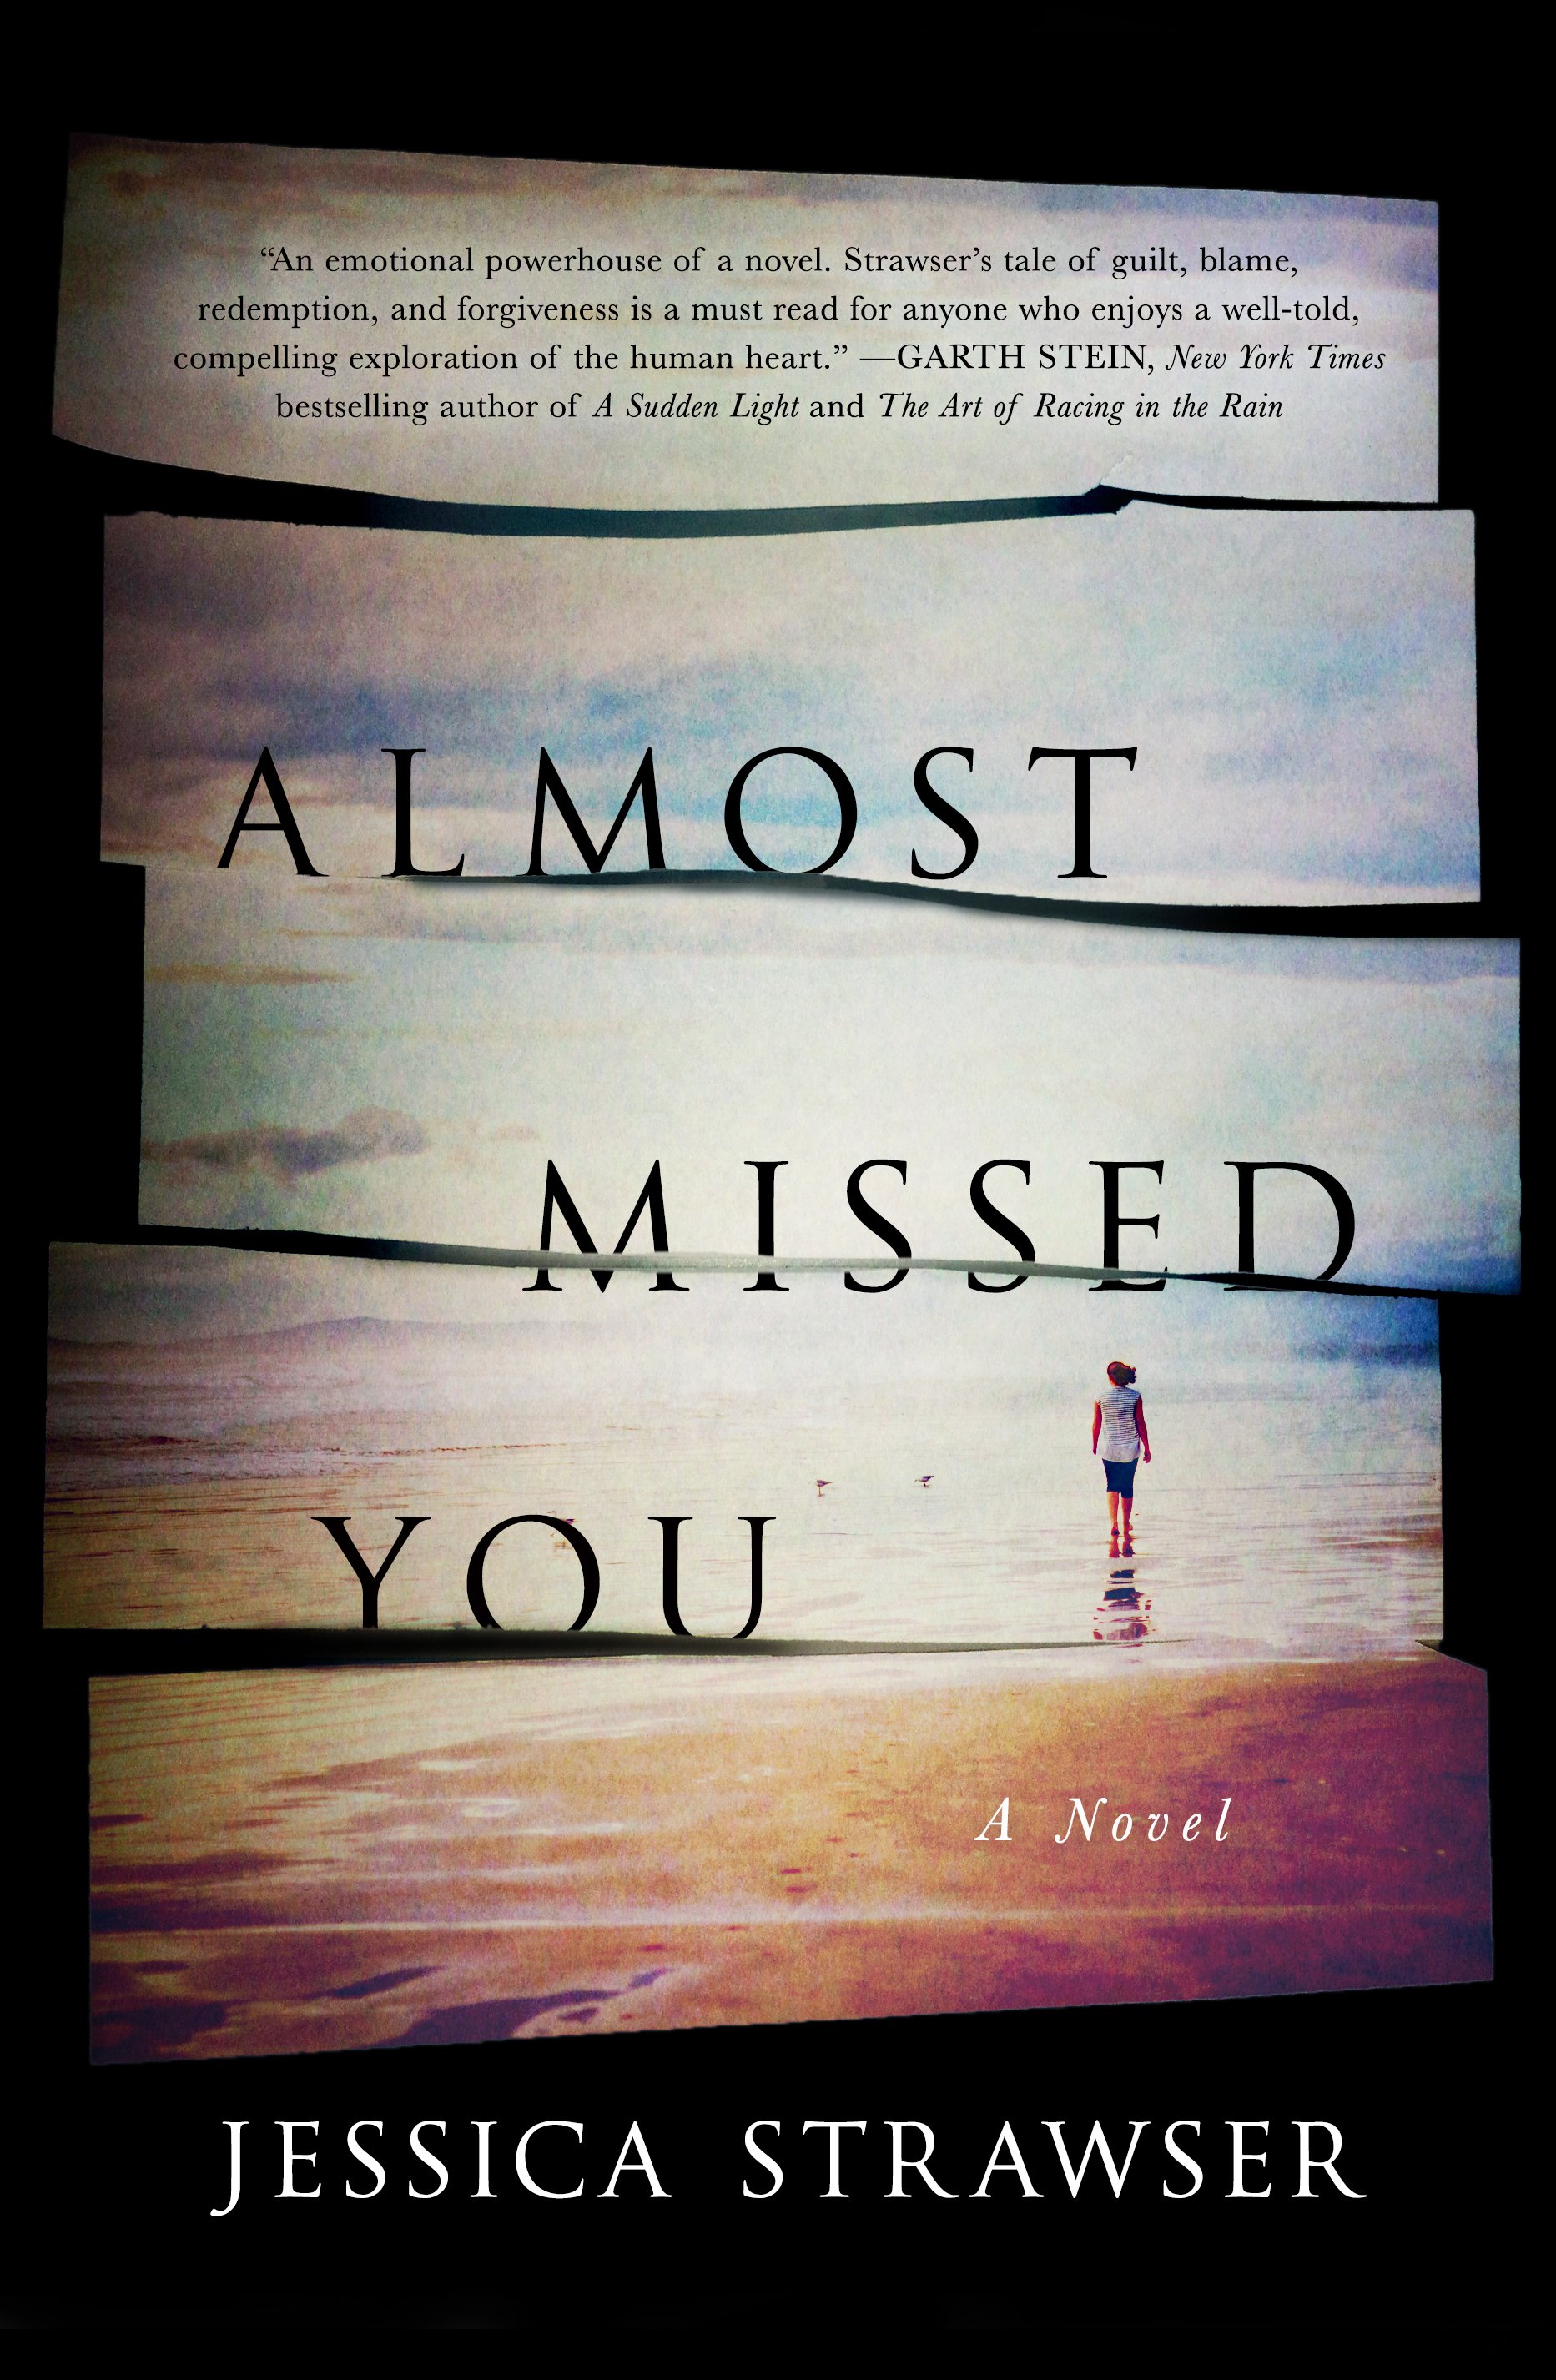 The cover for Almost Missed You by Jessica Strawser